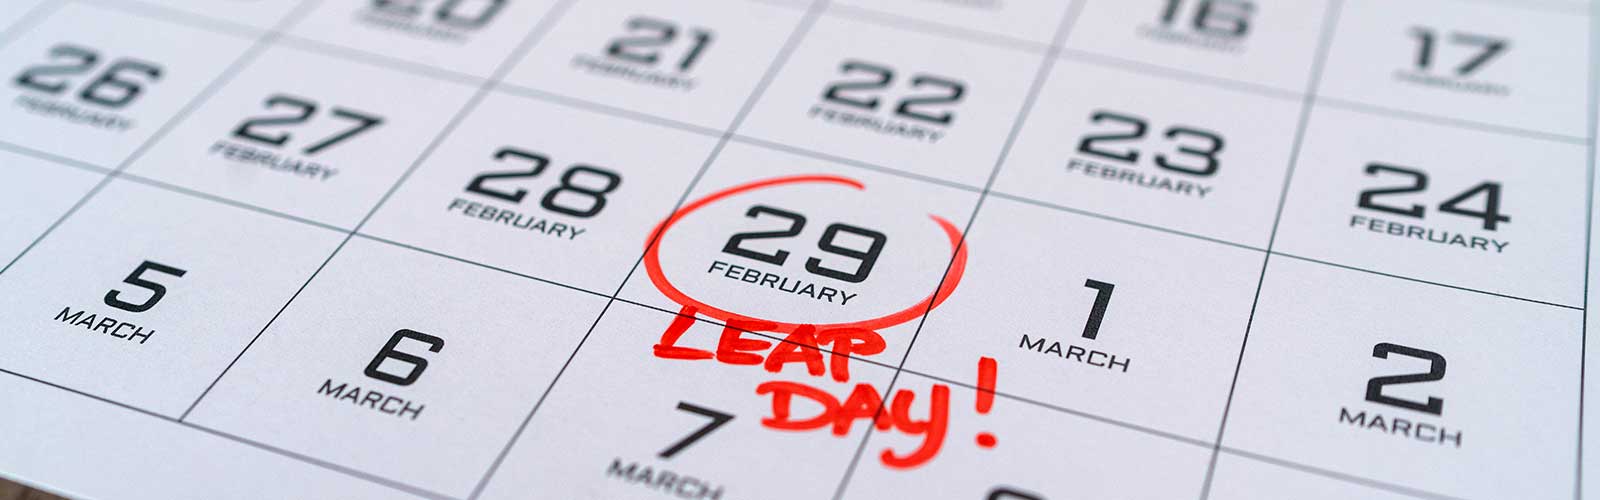 February freebie – what will you do with the extra day?